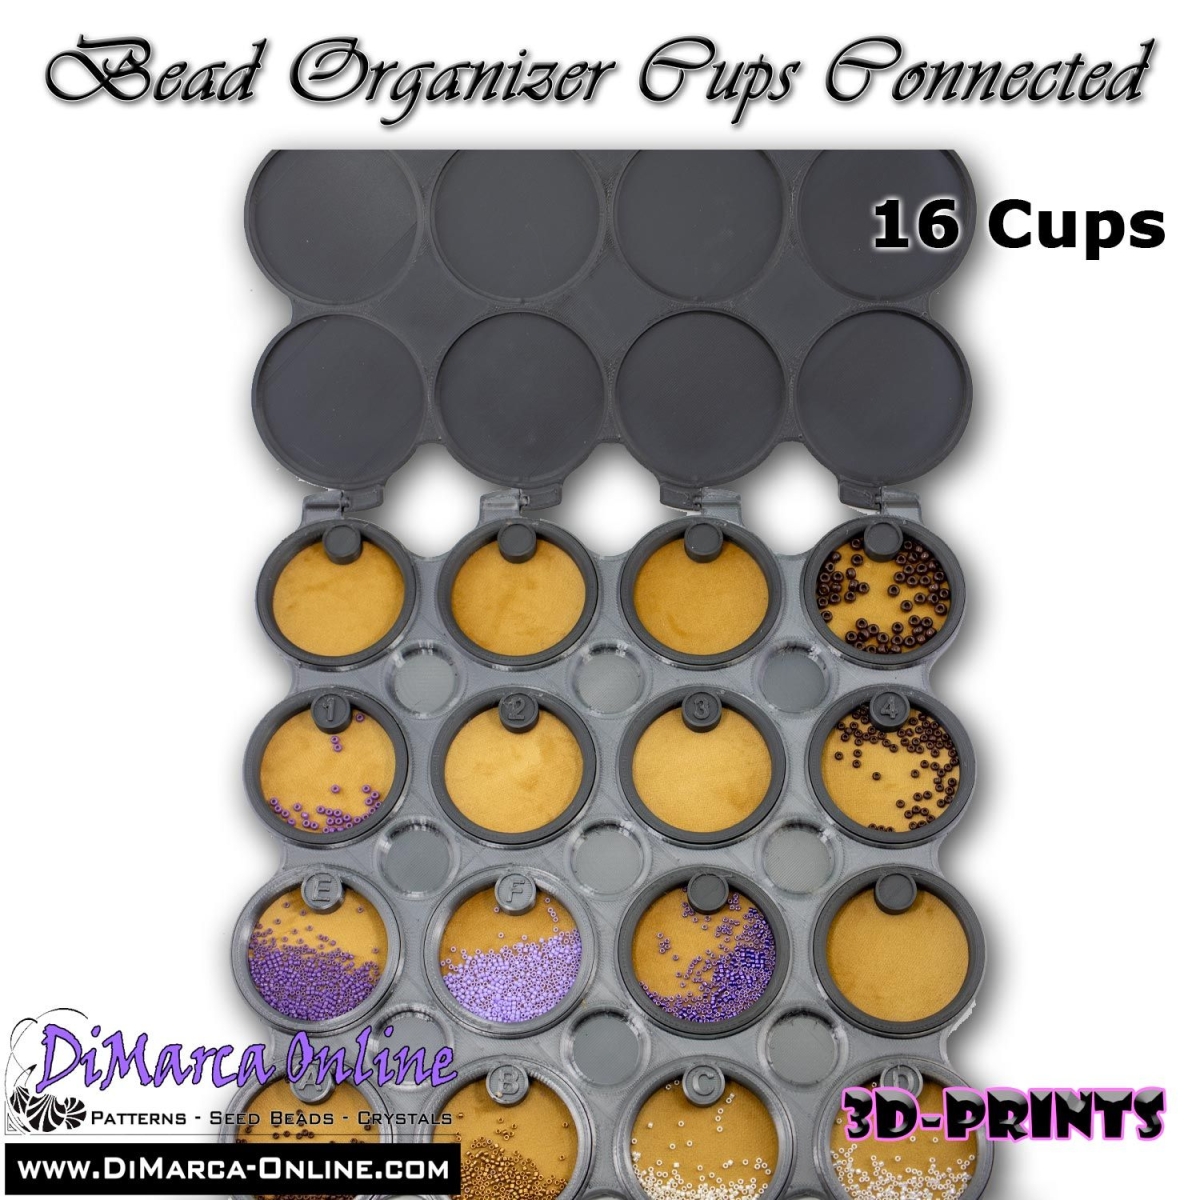 Bead Organizer Cups Connected - 08 Cups - Alphabet, Numbers or Blanks with  Lid - DiMarca Online